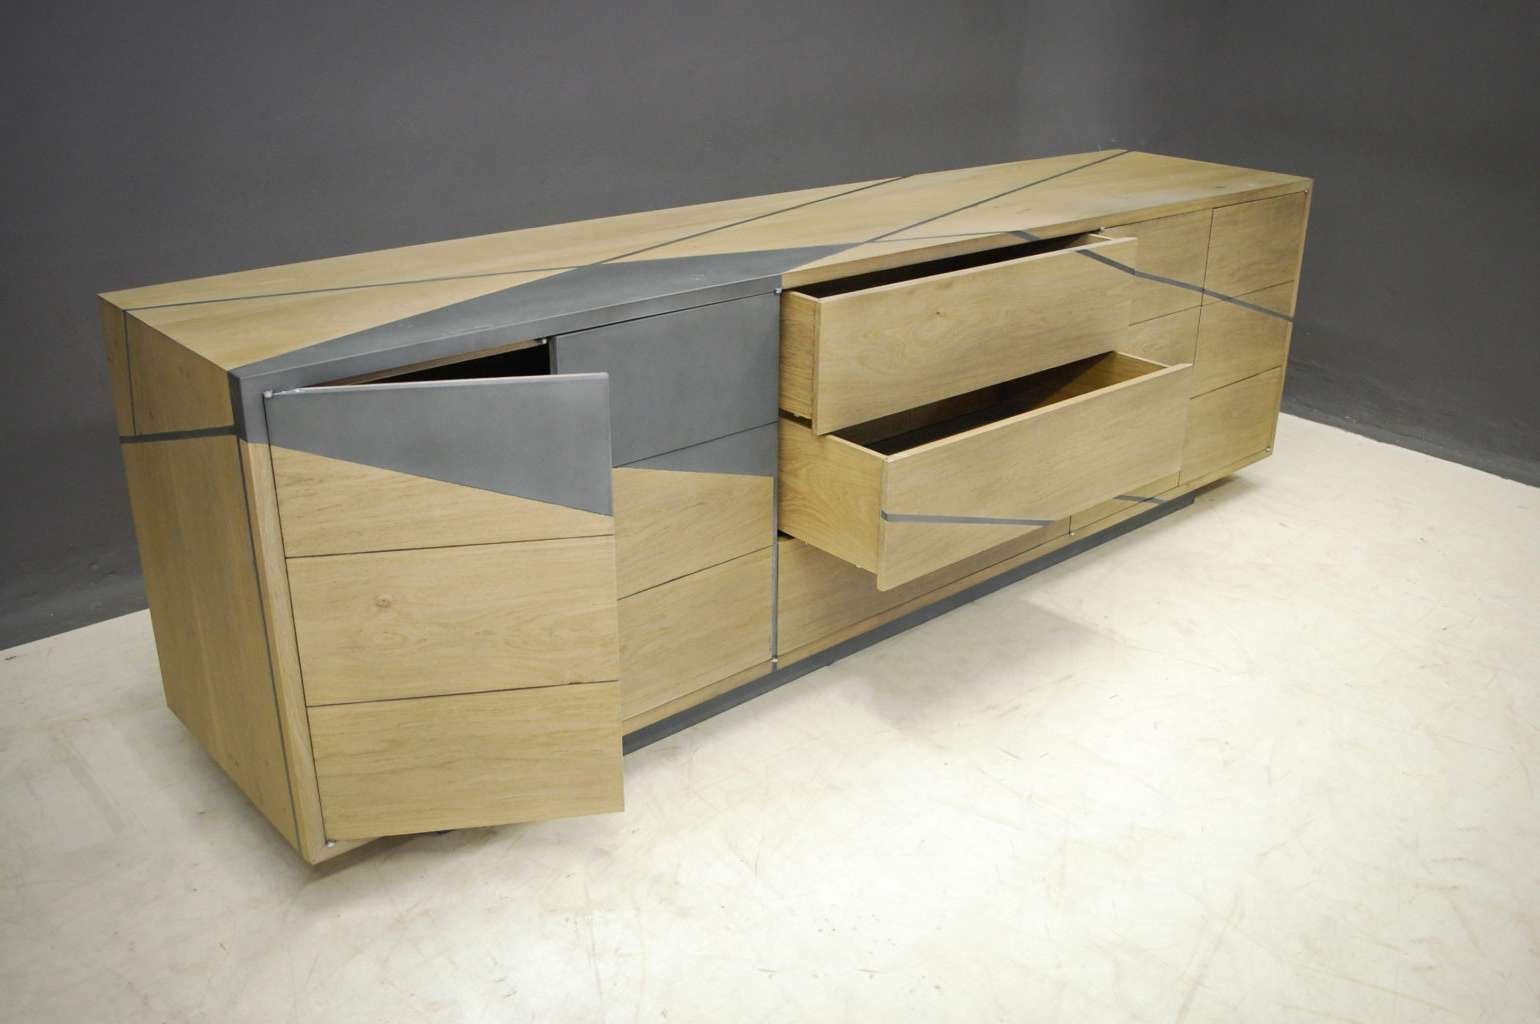 Pierre Cronje | Sideboards Intended For Bespoke Sideboards (View 8 of 20)